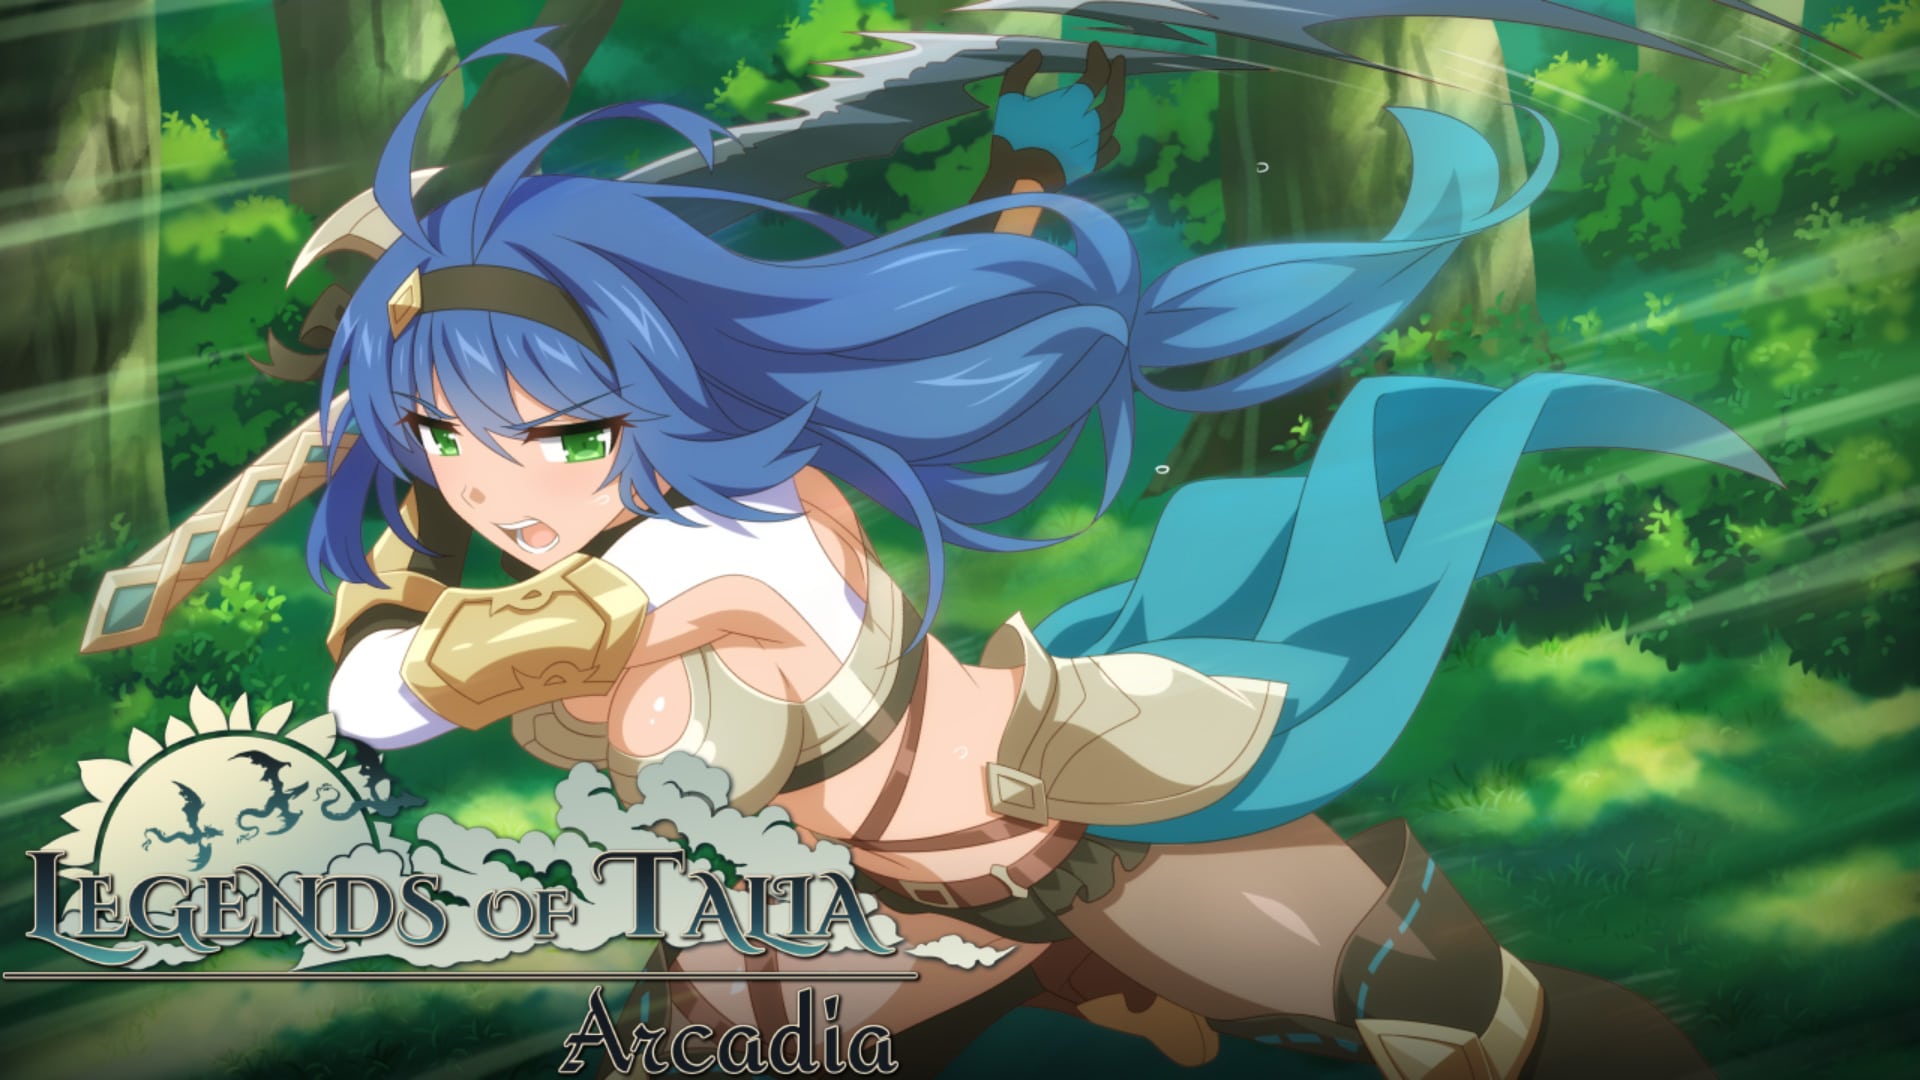 Visual Novel ‘Legends of Talia: Arcadia’ Launches on Switch, PS4, and PS5 in the West